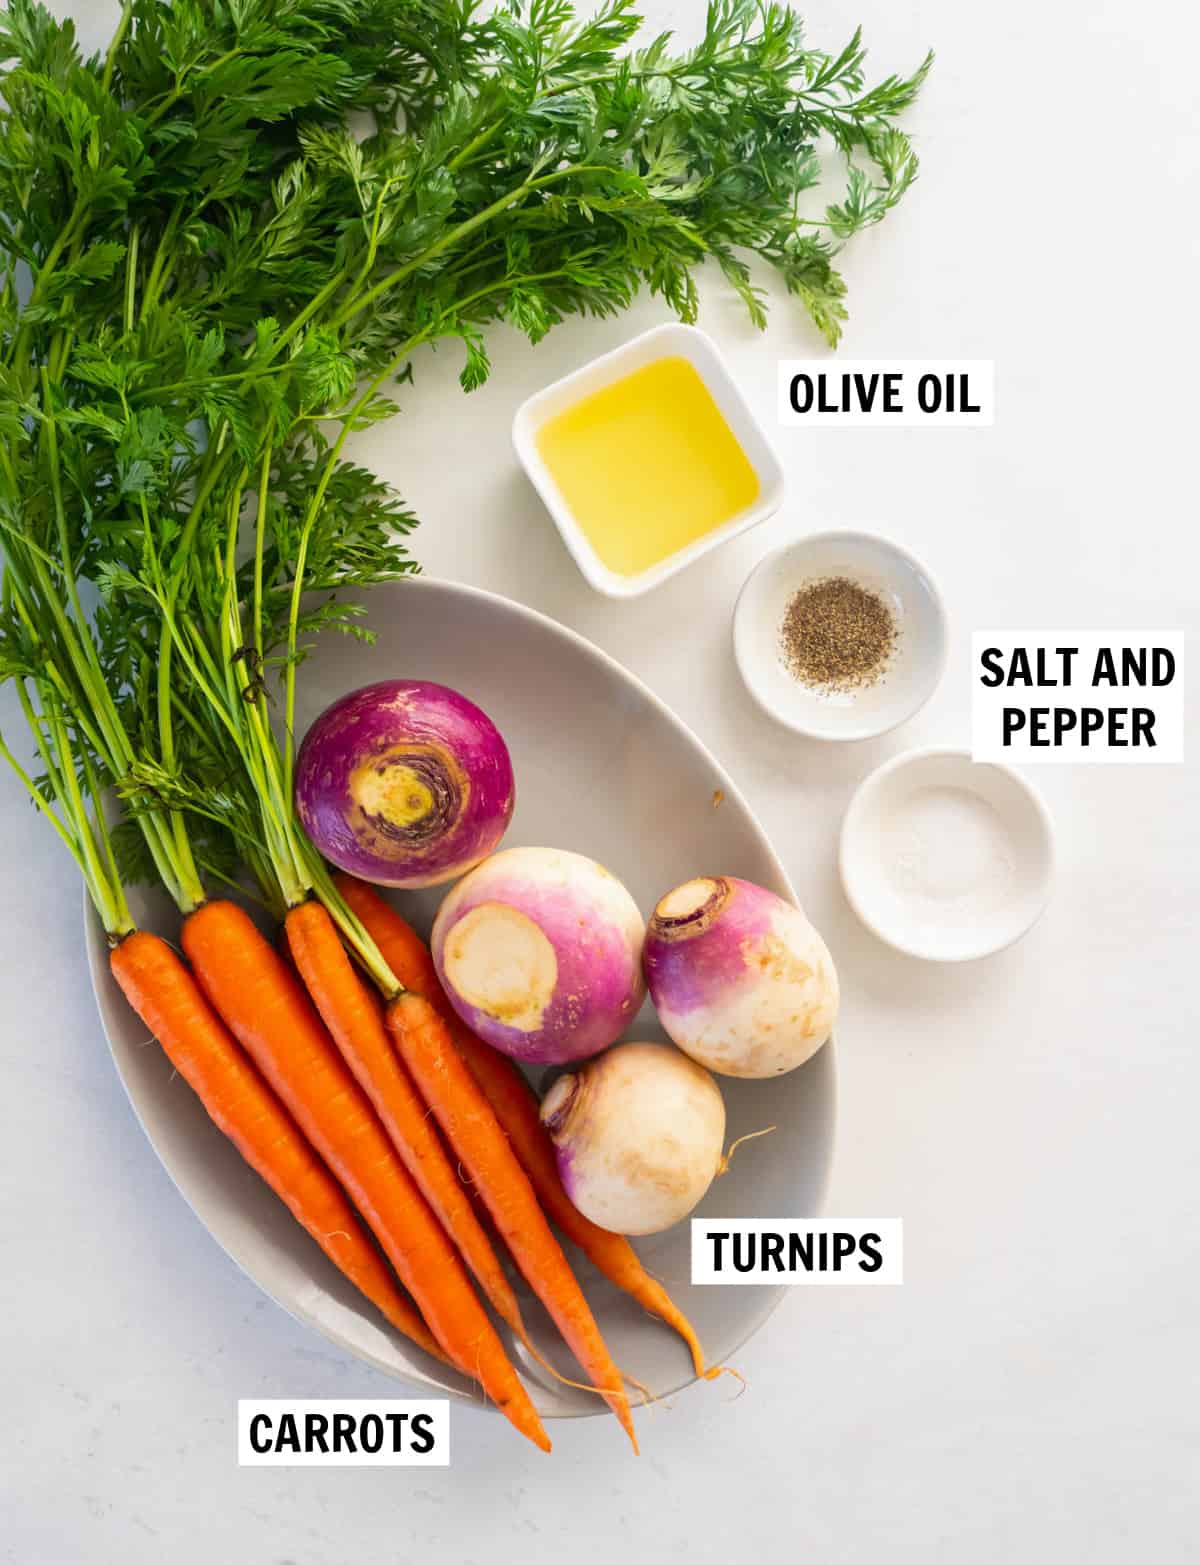 all of the ingredients for roasted turnips and carrots on a white tabletop